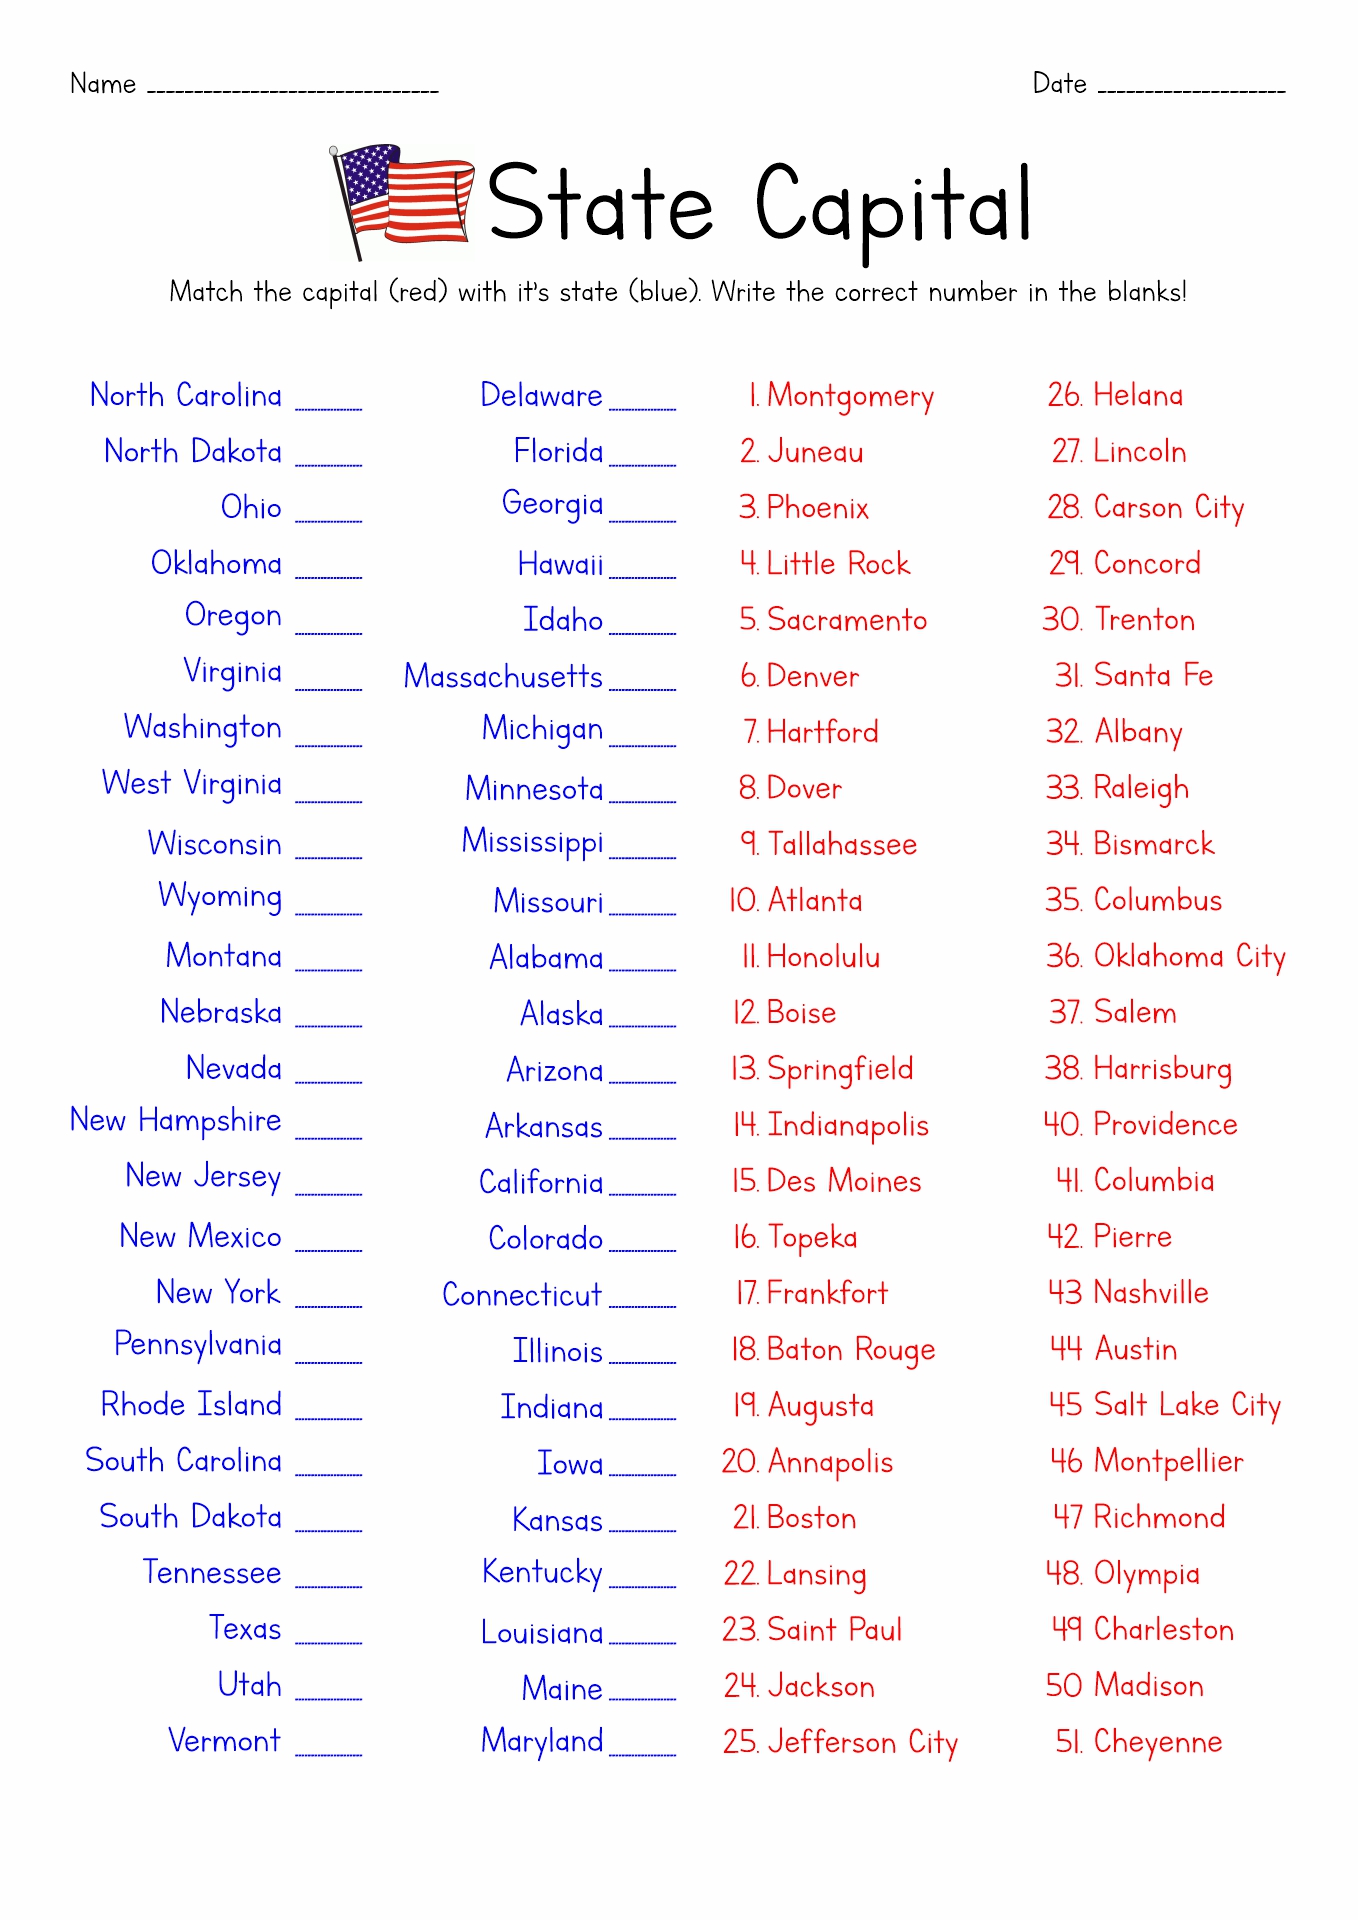 list-of-50-states-and-capitals-printable